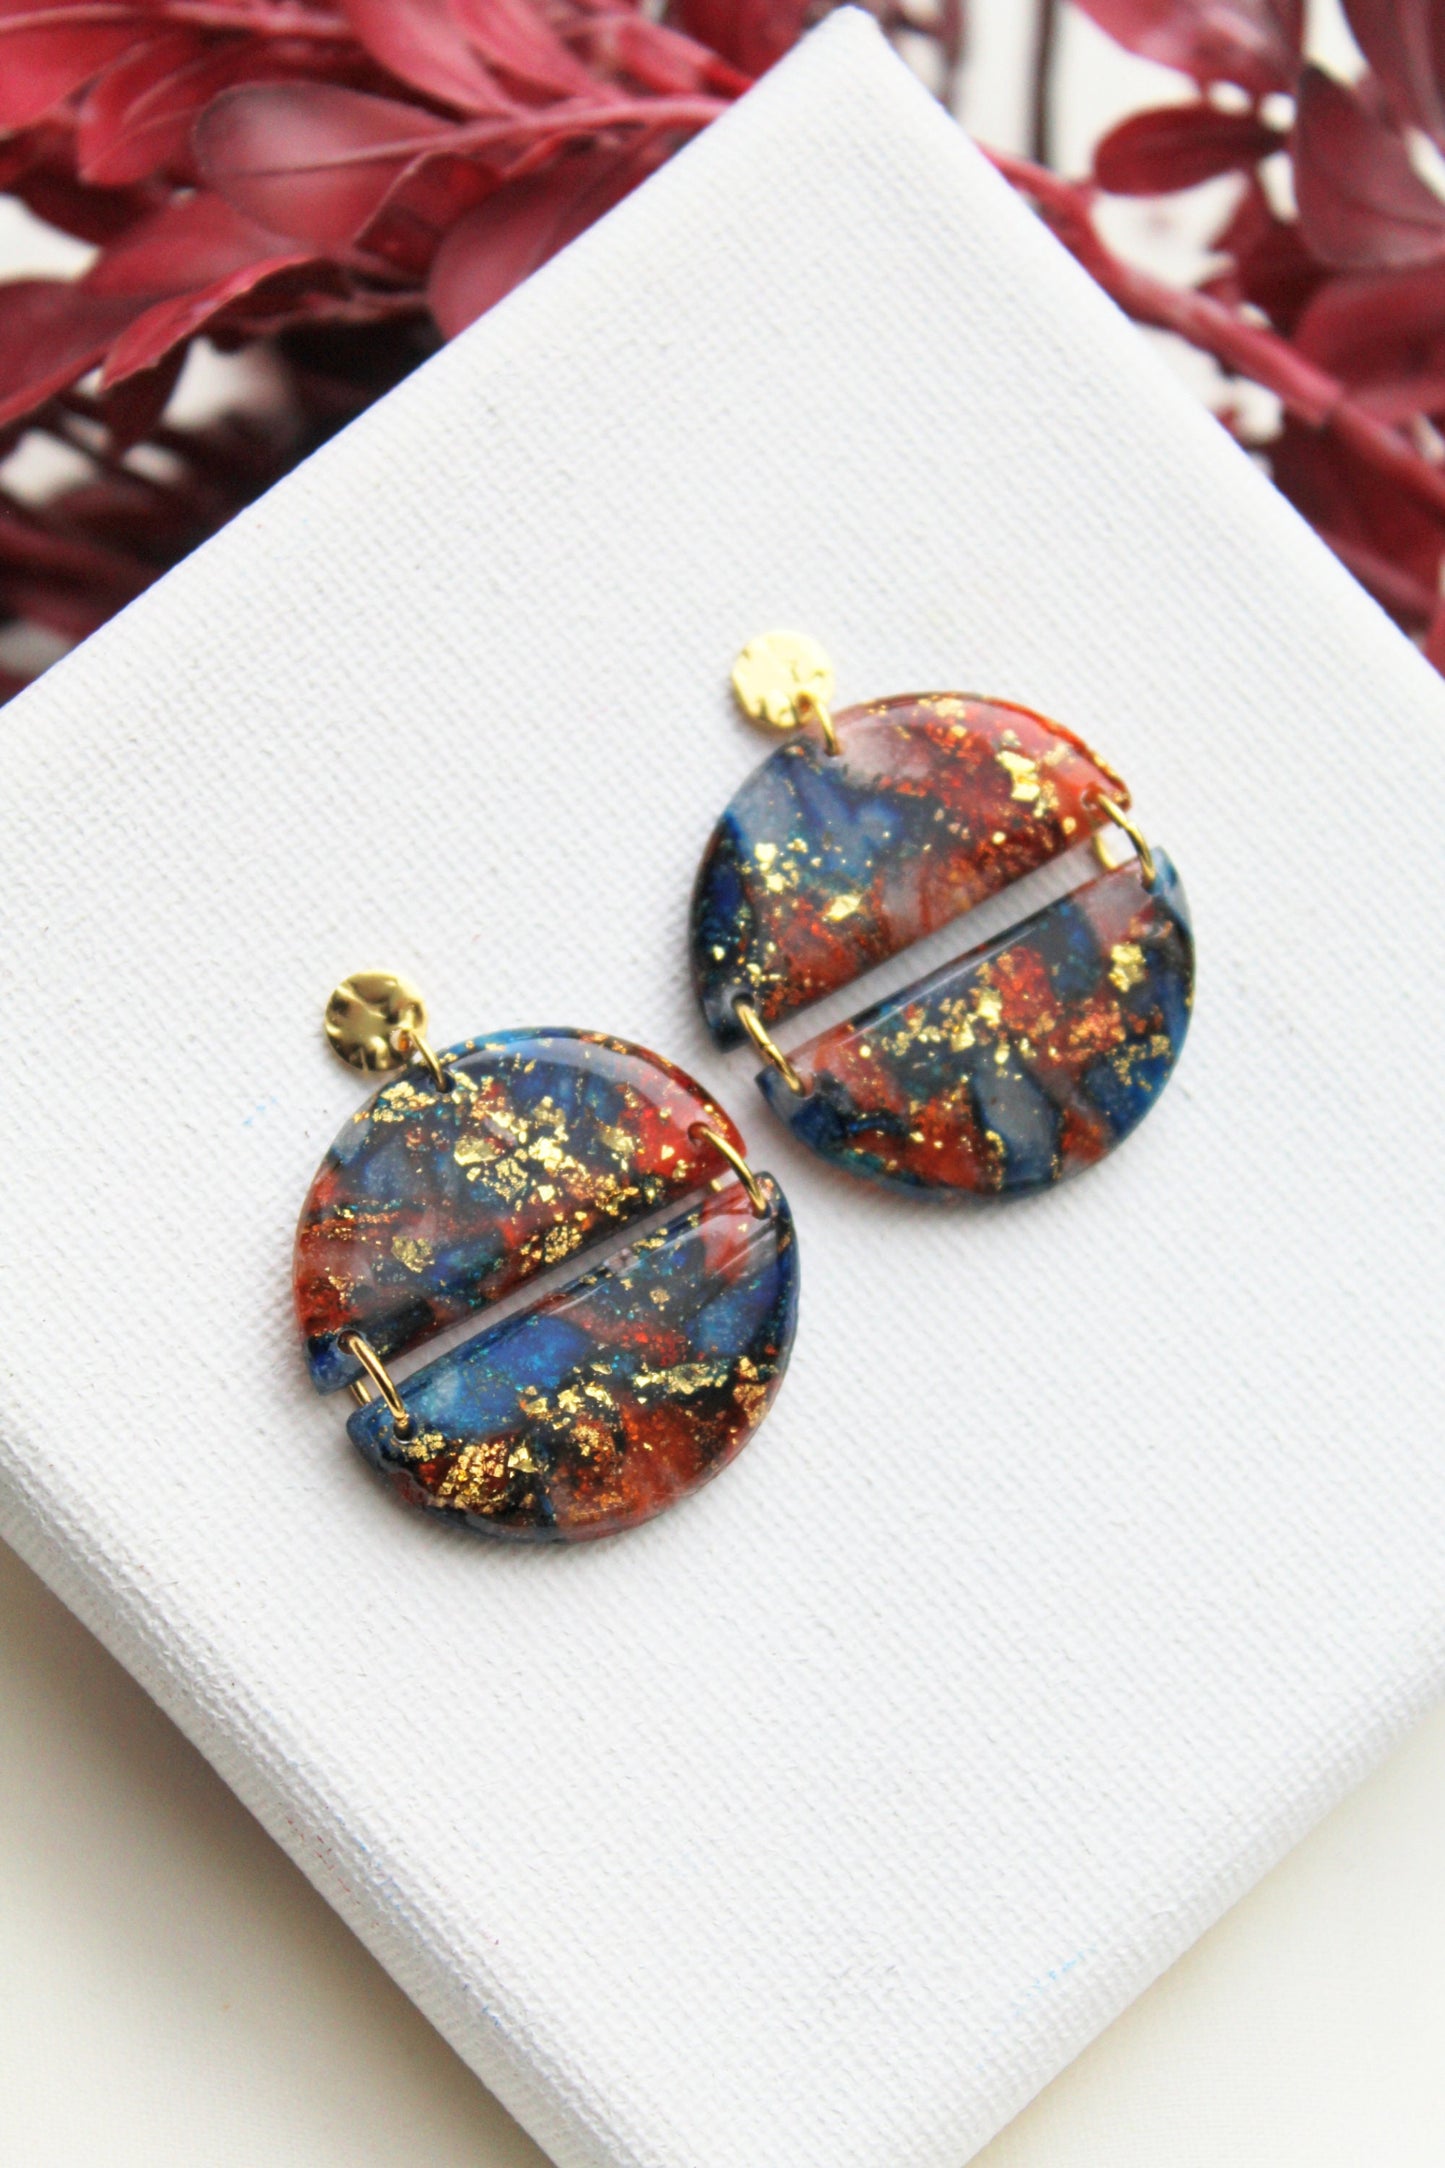 Statement Earrings, Marble Earrings, Blue, Red, Golden, Polymer Clay Earrings, Christmas Party, Elegant Earrings, Clay Earrings, Handmade